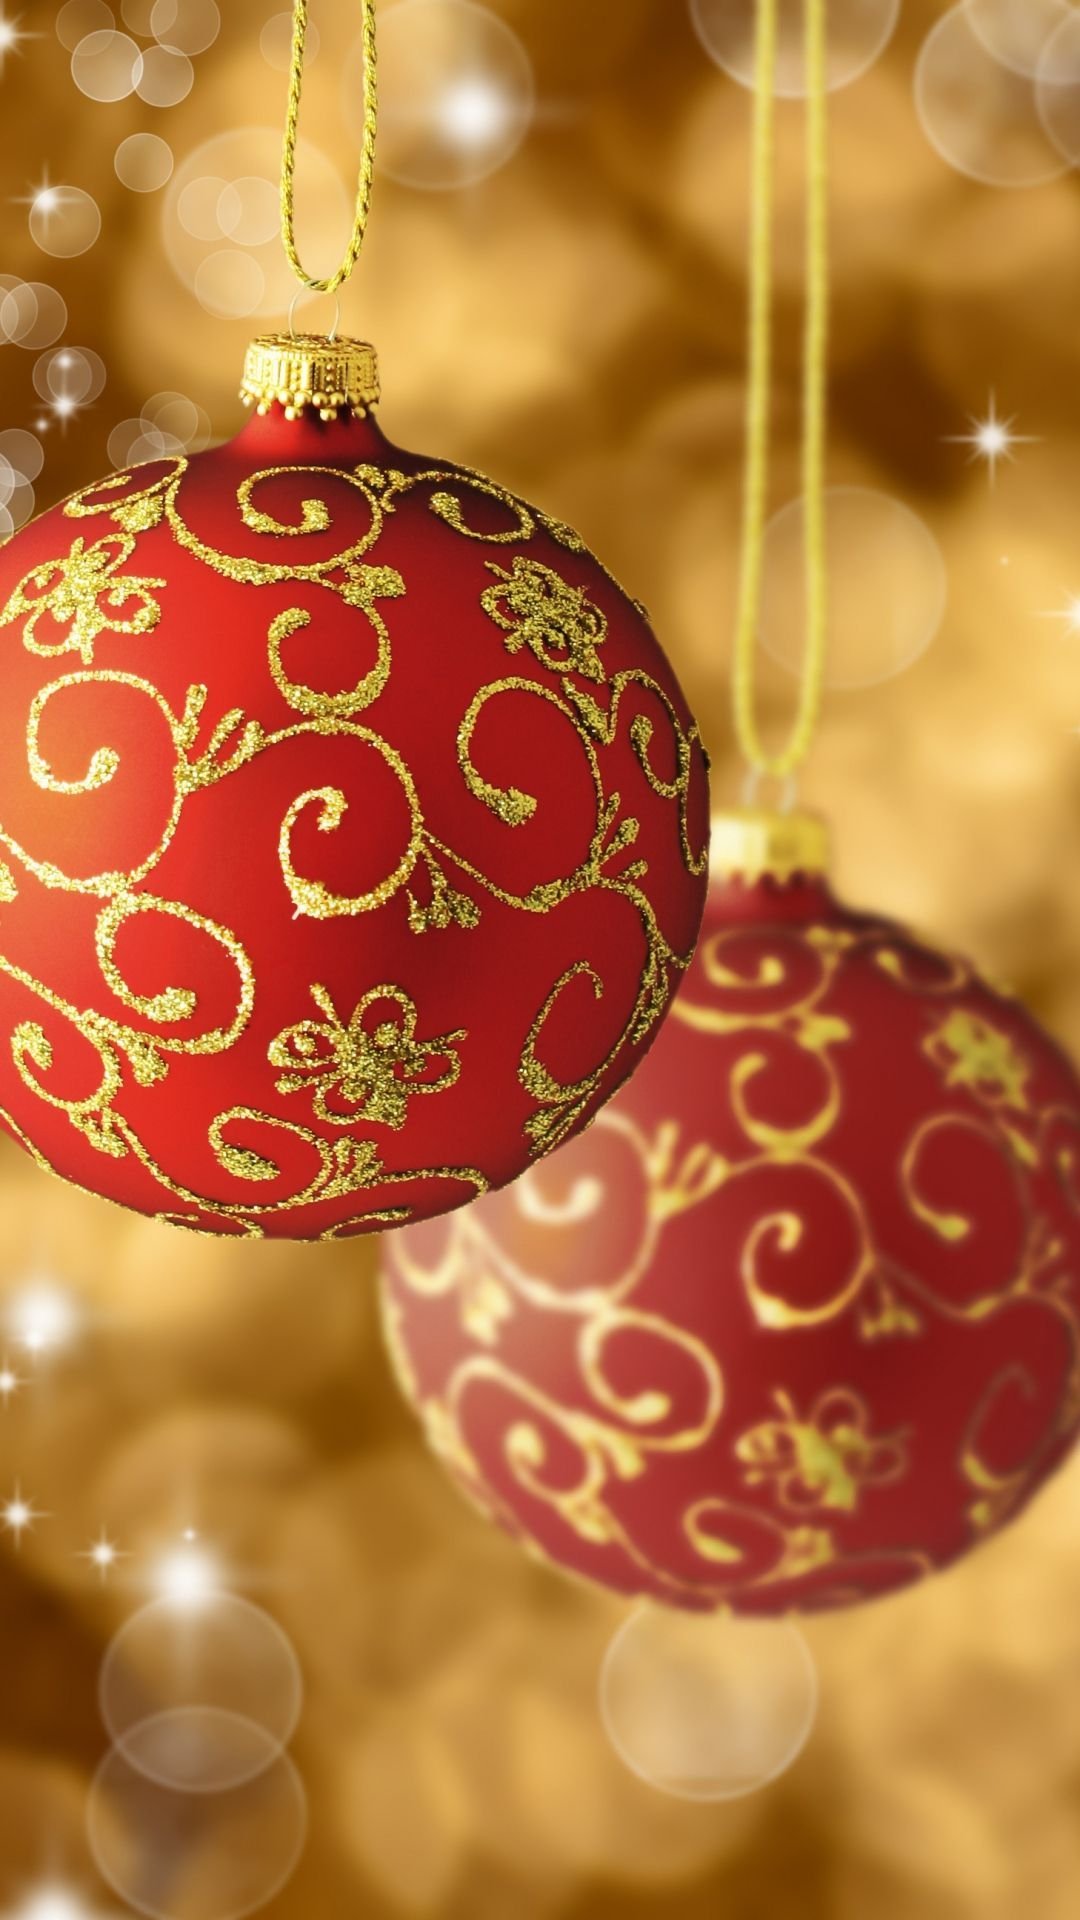 1080x1920 Red and Gold Christmas Wallpapers Top Free Red and Gold Christmas Backgrounds